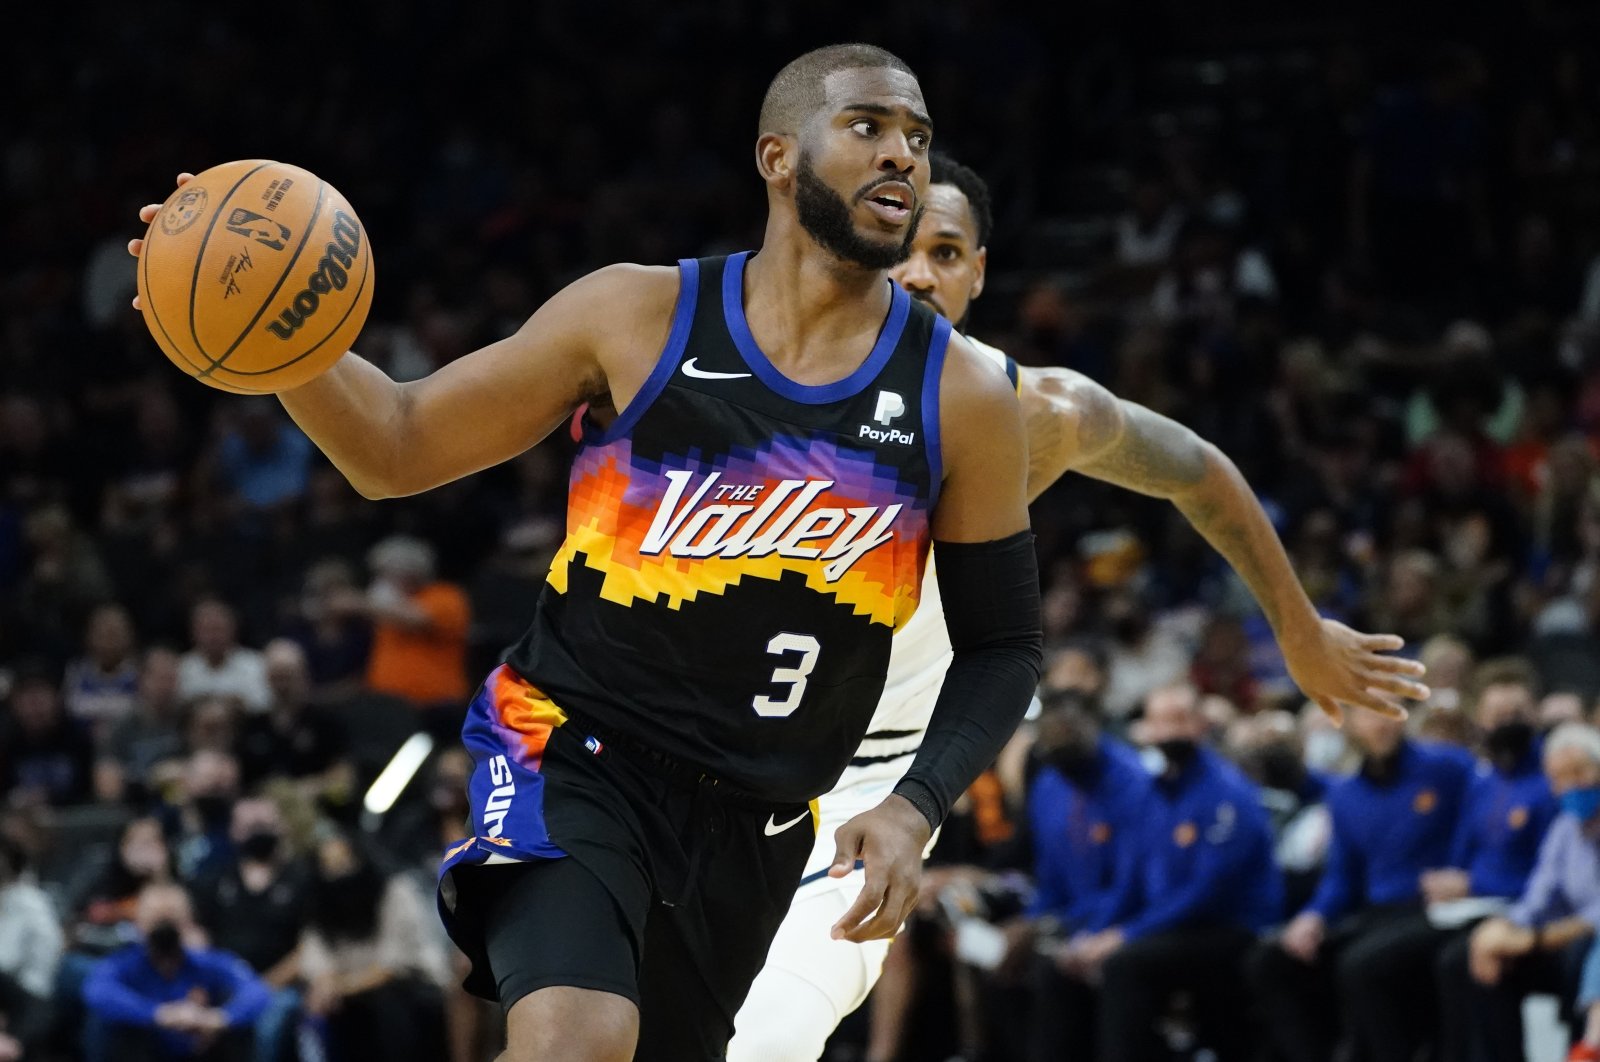 Phoenix Suns guard Chris Paul (3) drives against the Denver Nuggets during the second half of an NBA basketball game, Wednesday, Oct. 20, 2021, in Phoenix. (AP Photo)